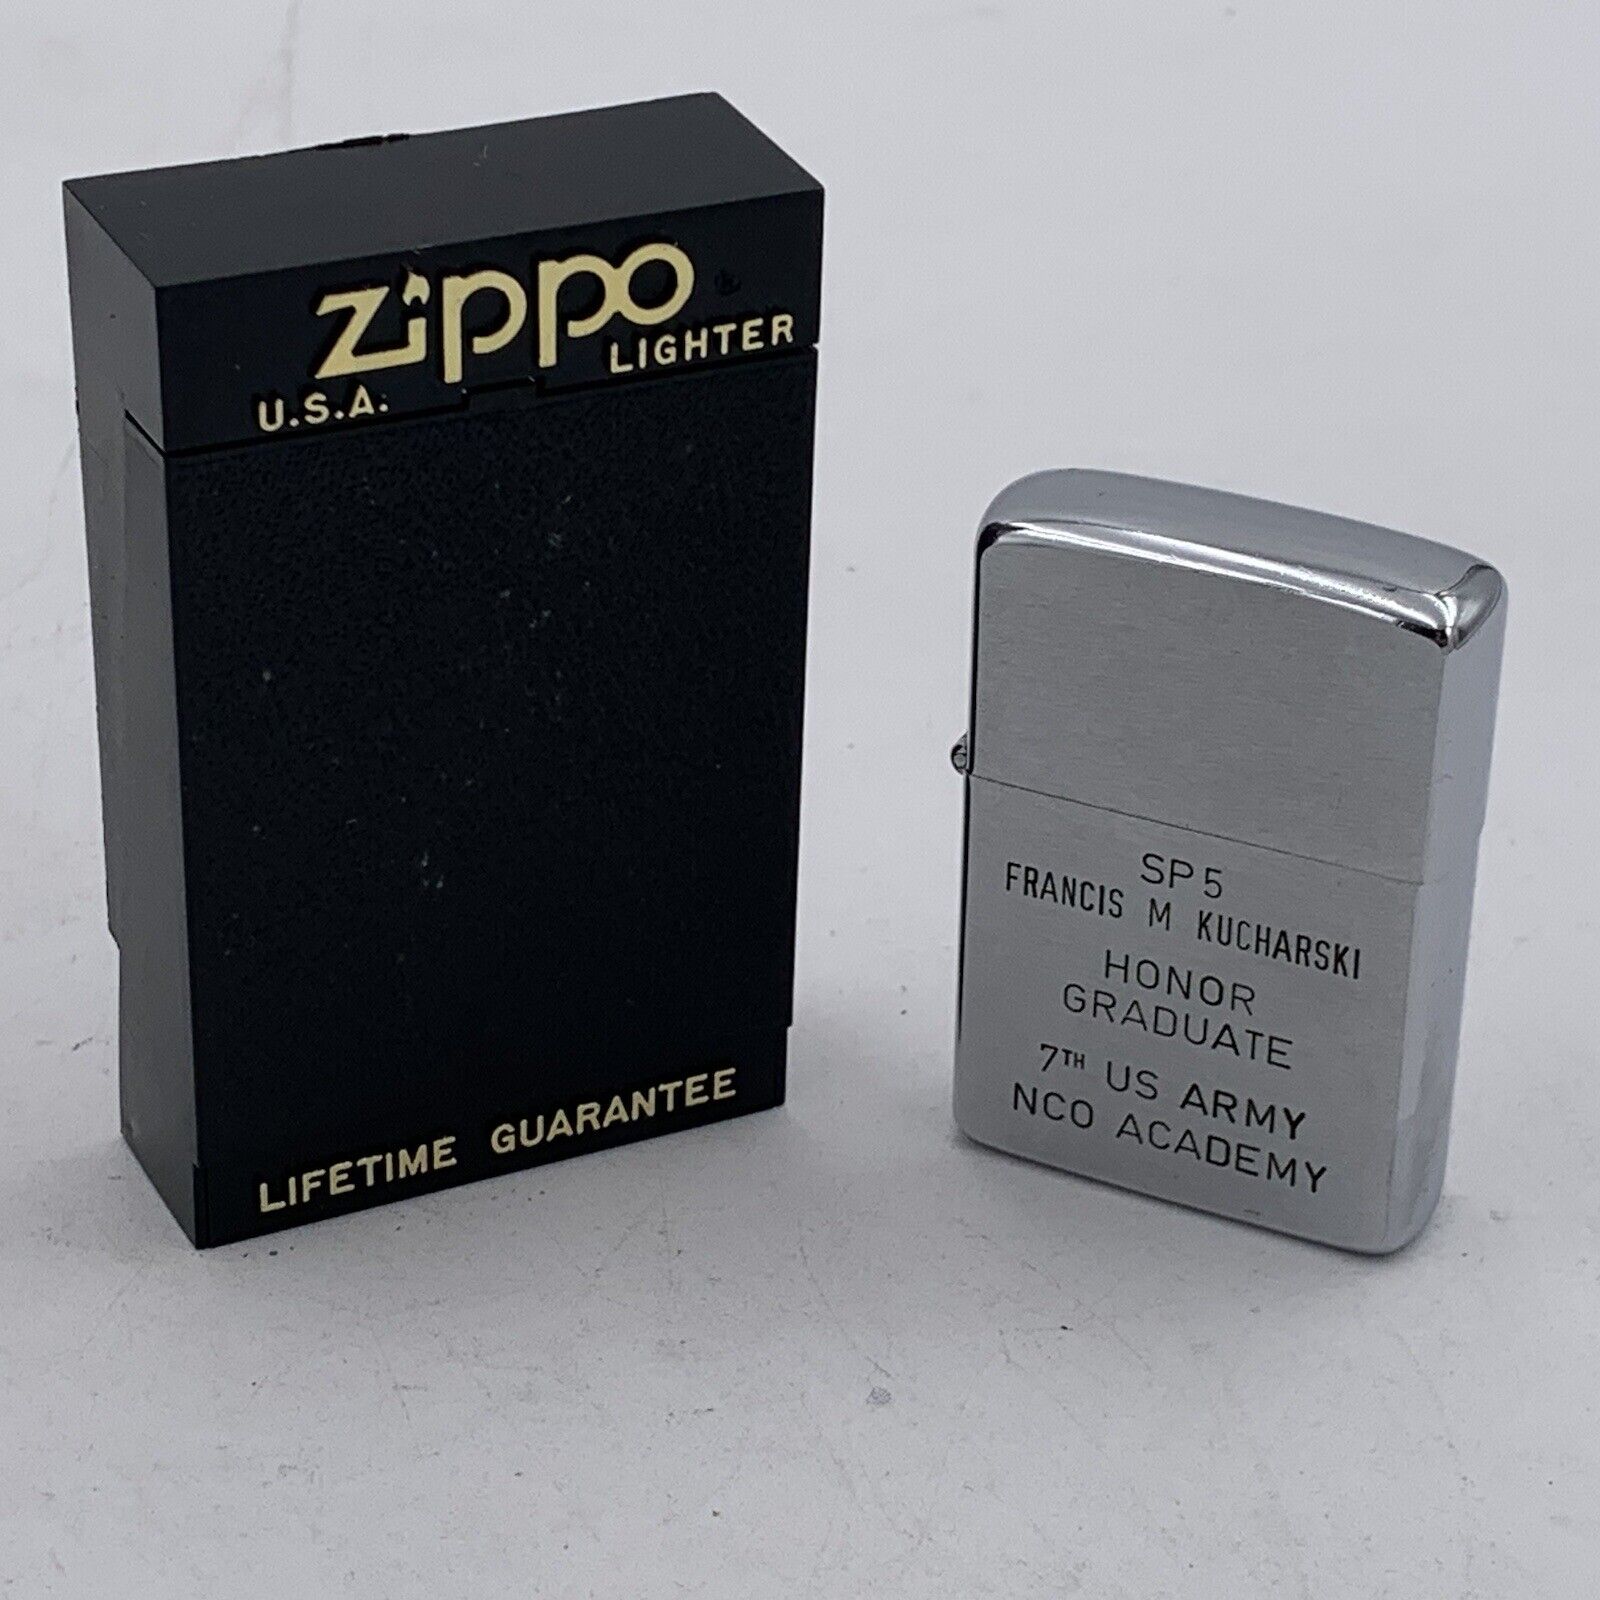 Vintage 1960s Engraved Zippo Lighter Honor Grad 7th US Army NCO Academy Clean